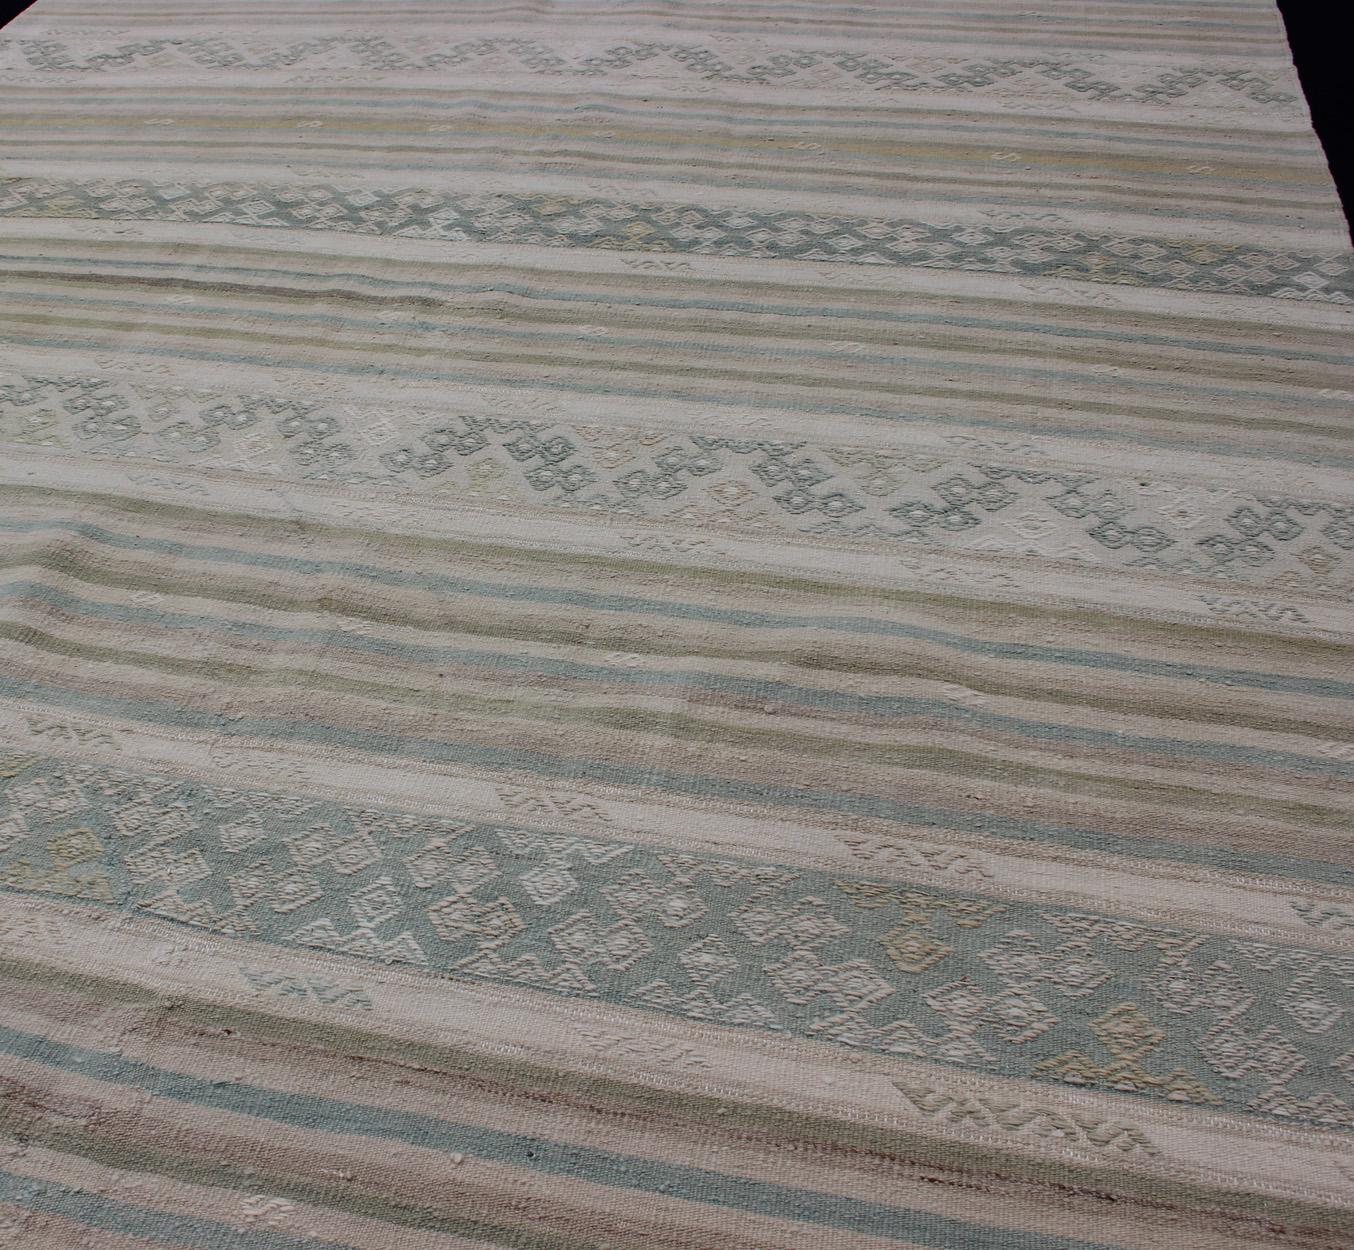 20th Century Turkish Flat-Weave Kilim in Muted Colors with Stripes and Embroideries For Sale